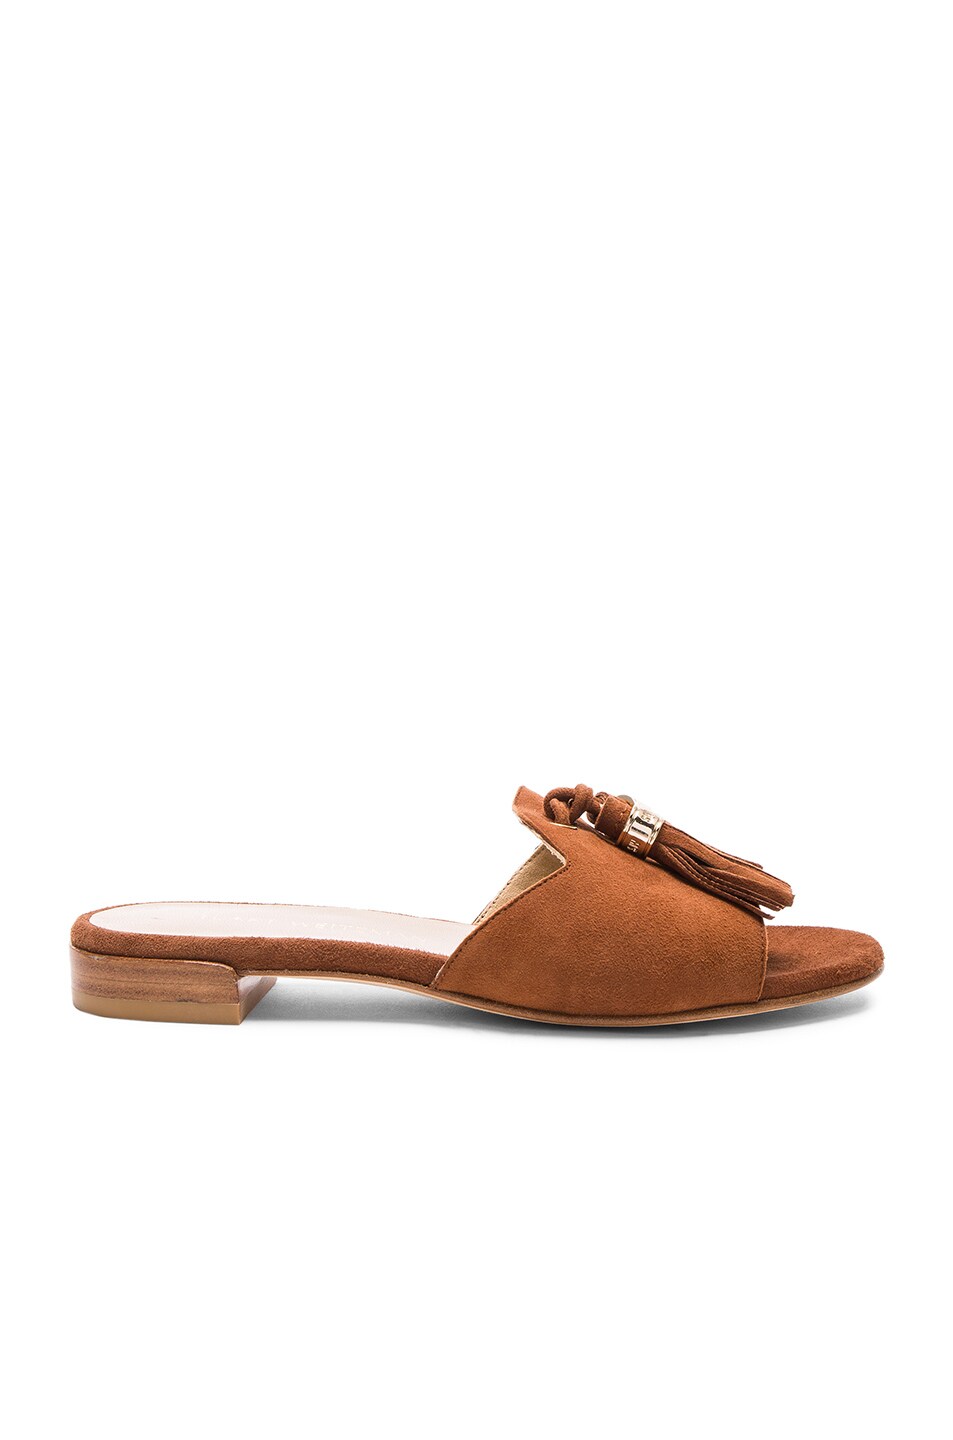 Image 1 of Stuart Weitzman Suede Two Tassels Sandals in Saddle Suede